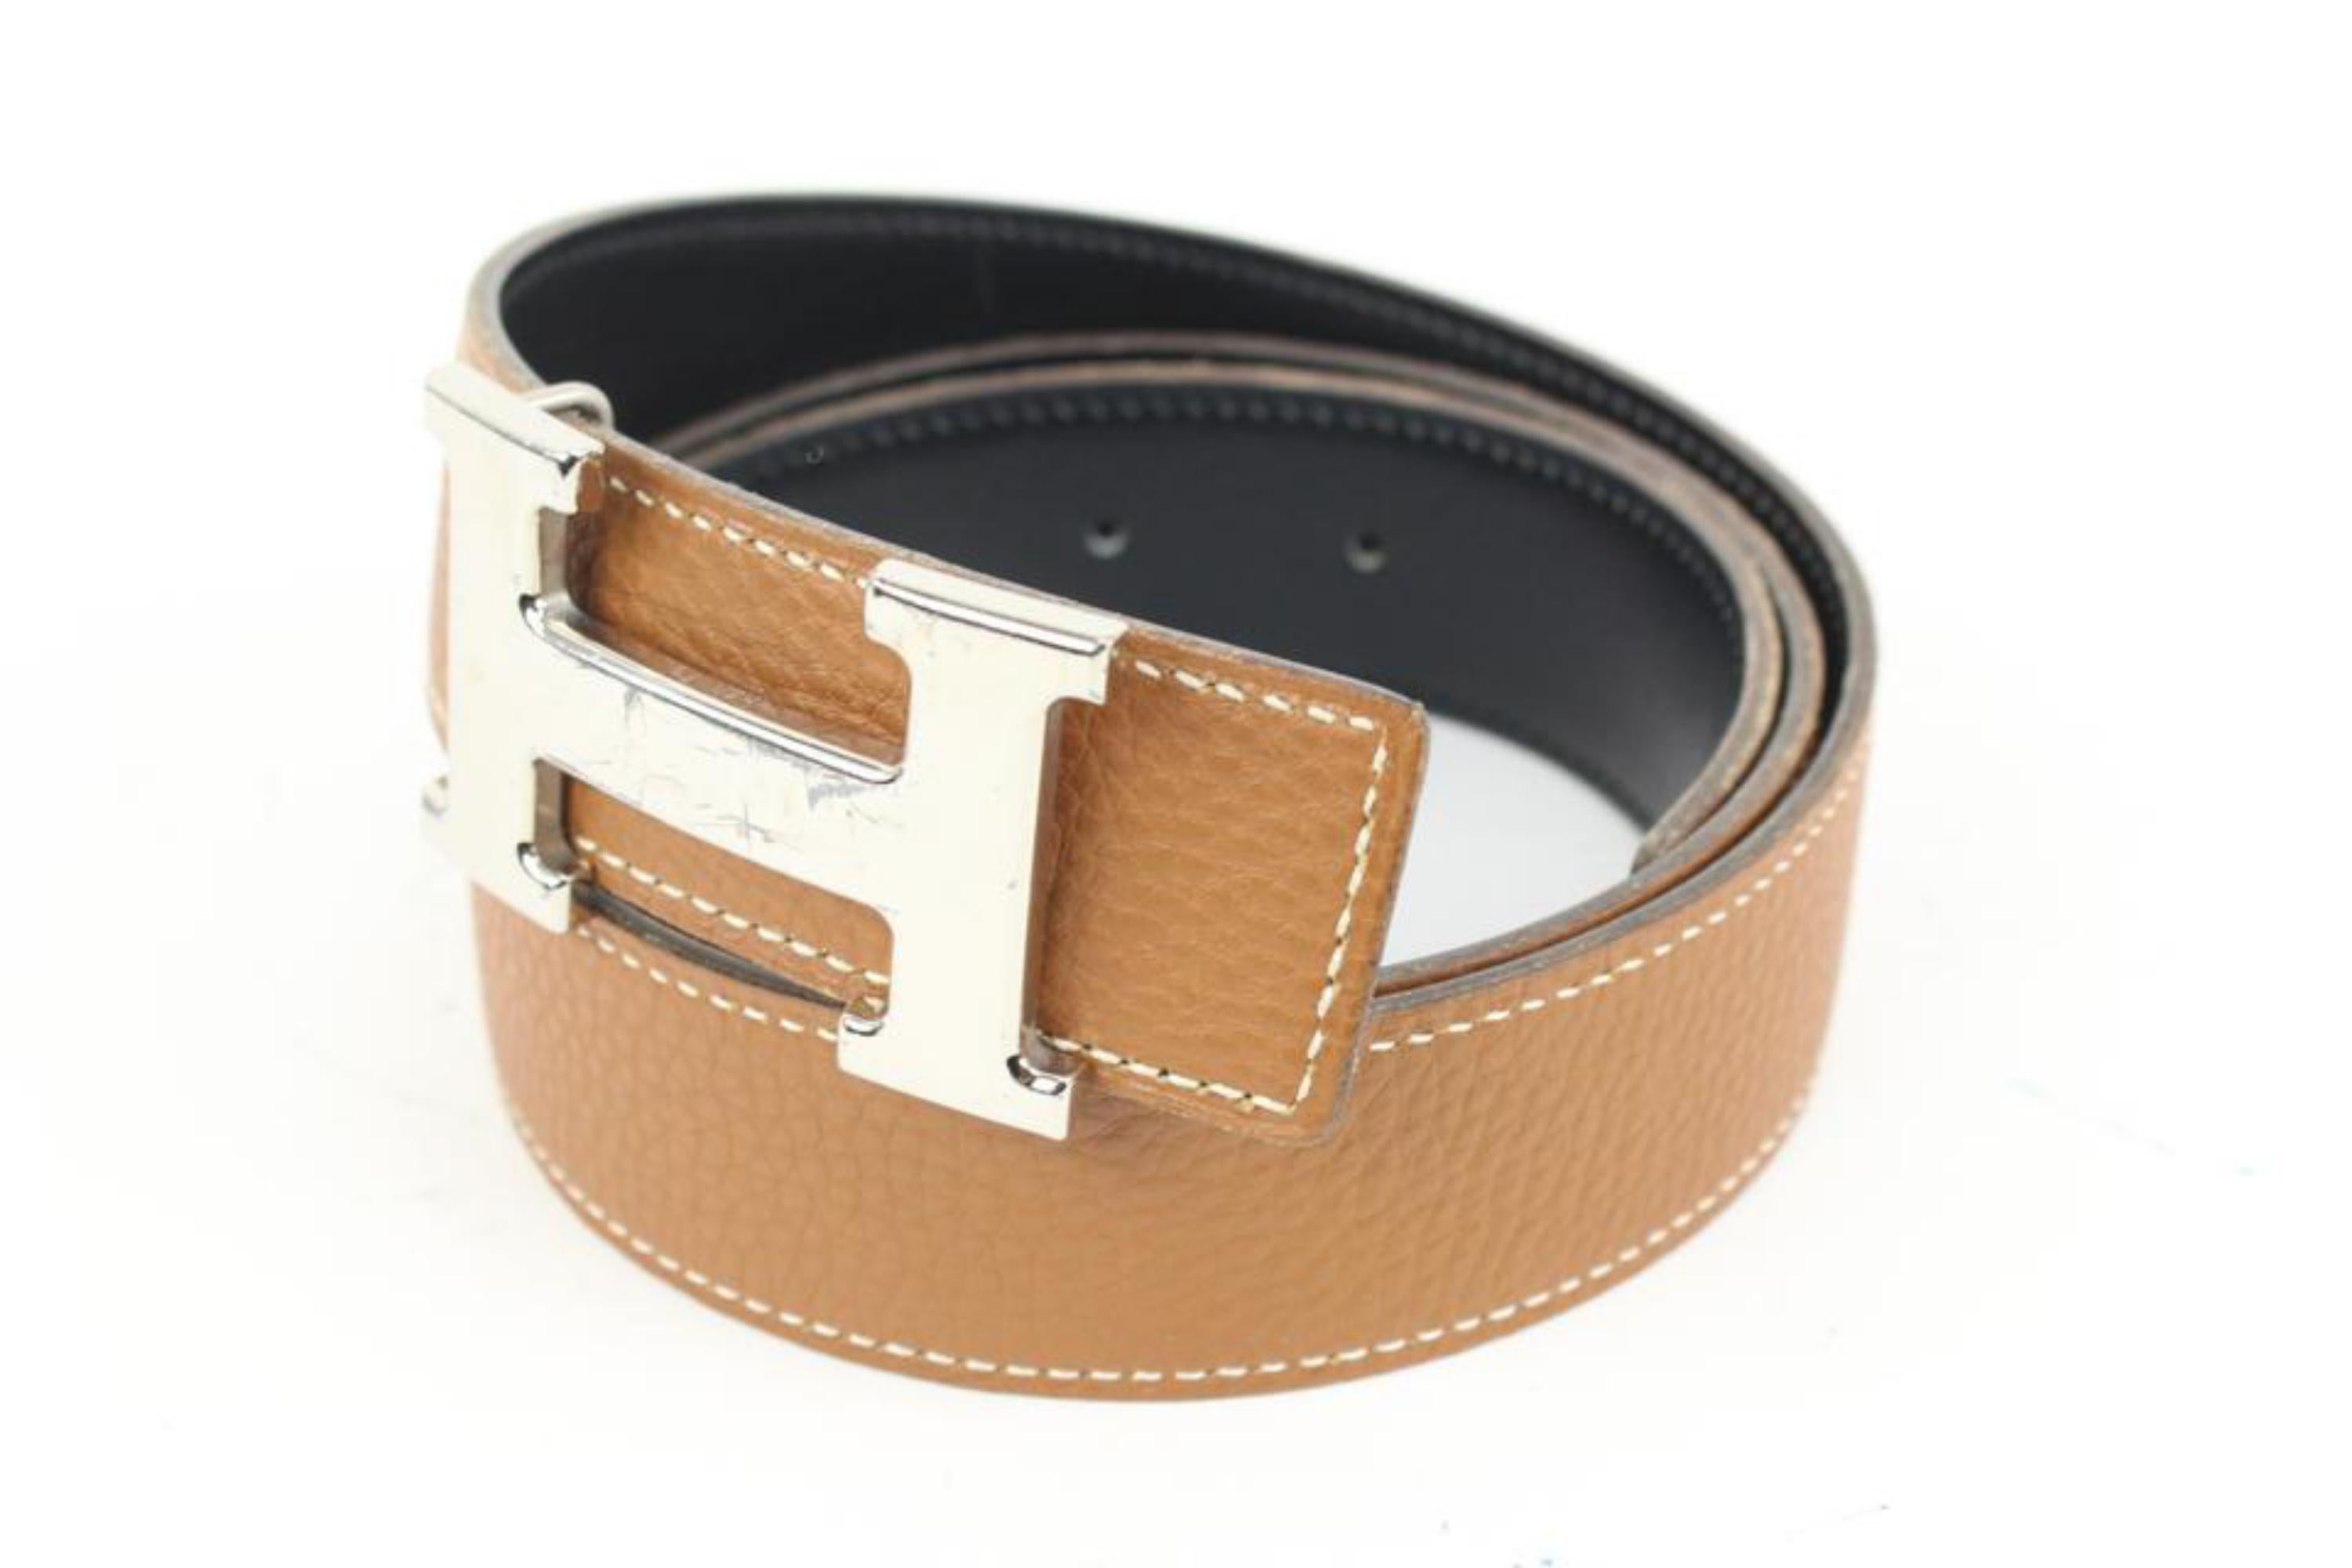 Hermès Size 85 Brown x Black x Silver 32mm Reversible H Logo Belt Kit 74h418s
Date Code/Serial Number: K in a Square
Made In: France
Measurements: Length:  39.5